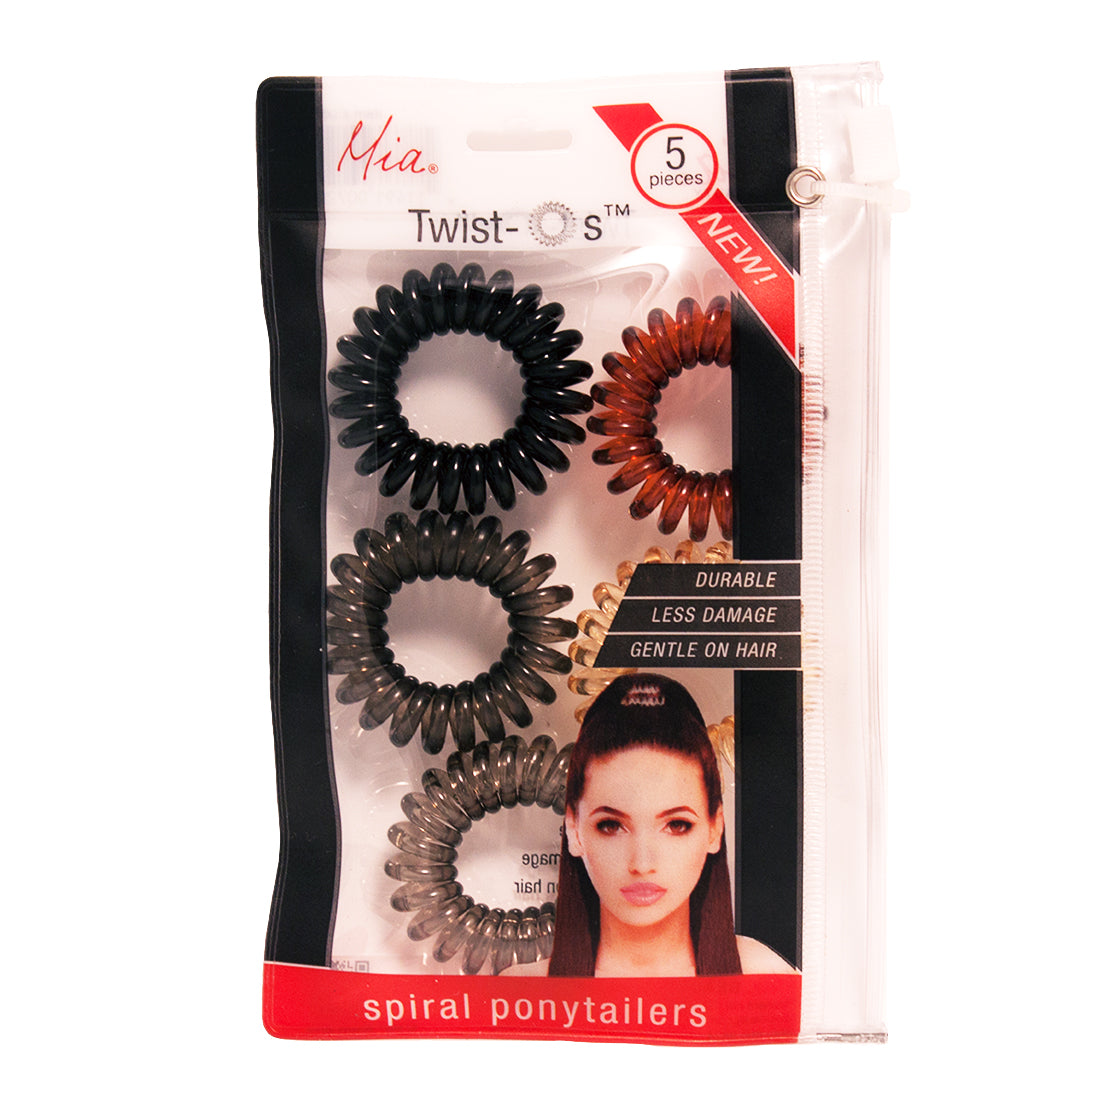 Mia® Twist Os - Natural Colors - spiral ponytail holders, telephone cord hair ties, coild hair ties, in zippered storage pouch - desgined by #MiaKaminski of Mia Beauty